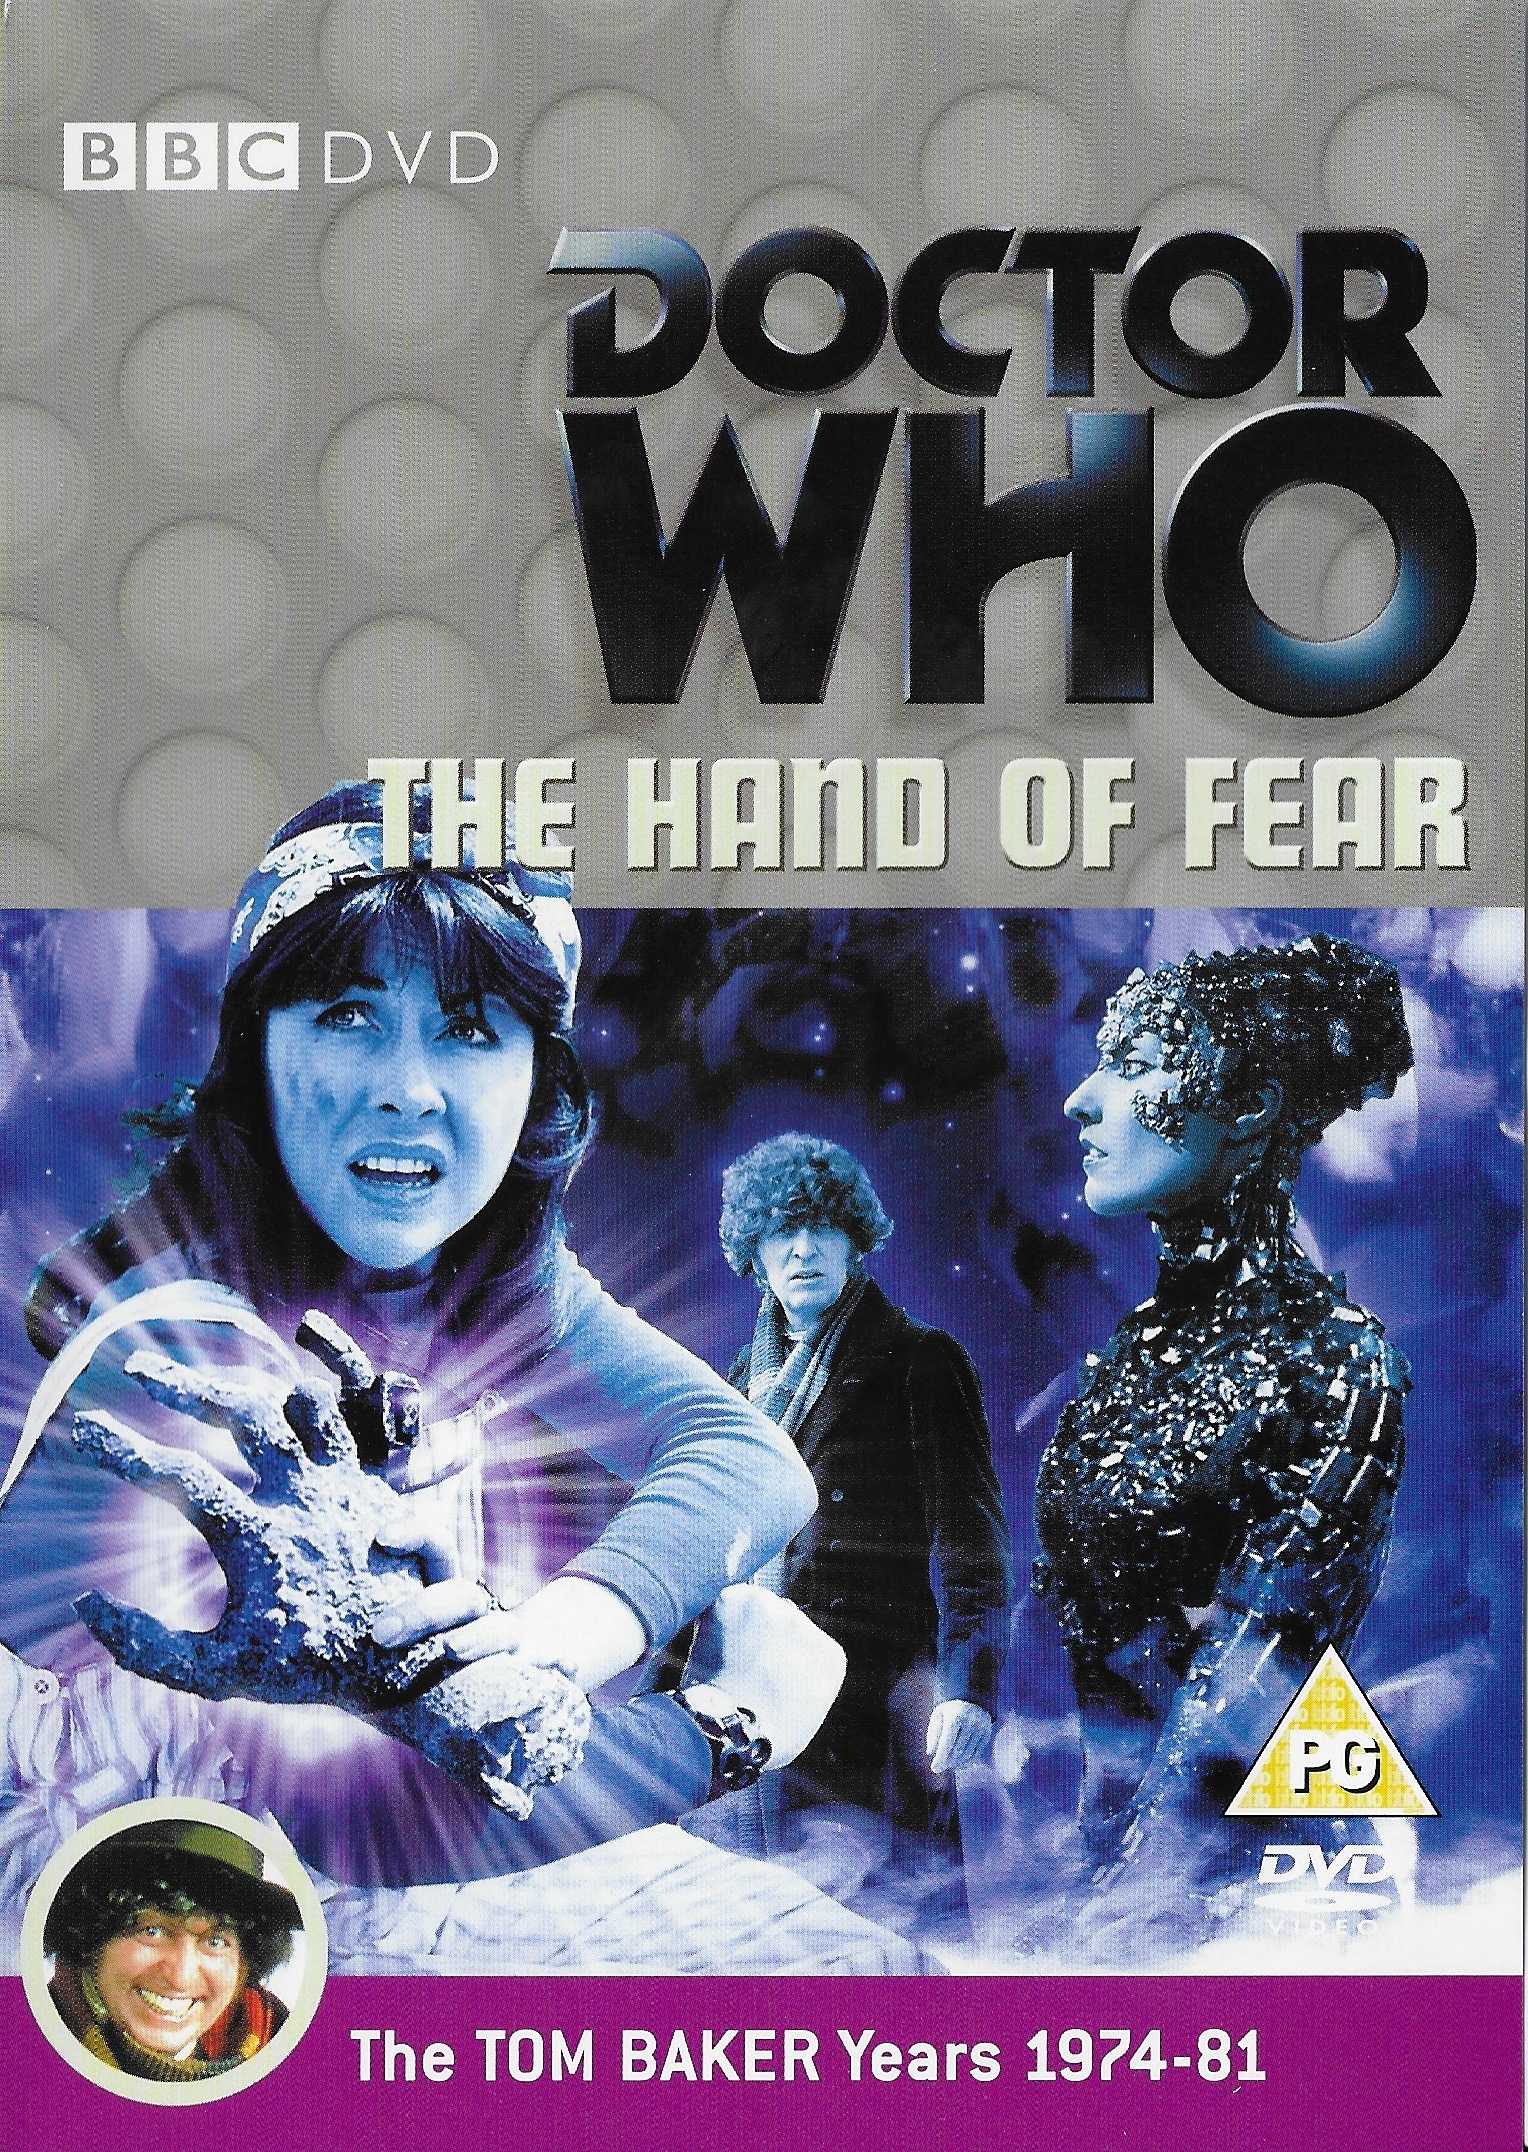 Picture of BBCDVD 1833 Doctor Who - The hand of fear by artist Bob Baker / Dave Martin from the BBC dvds - Records and Tapes library